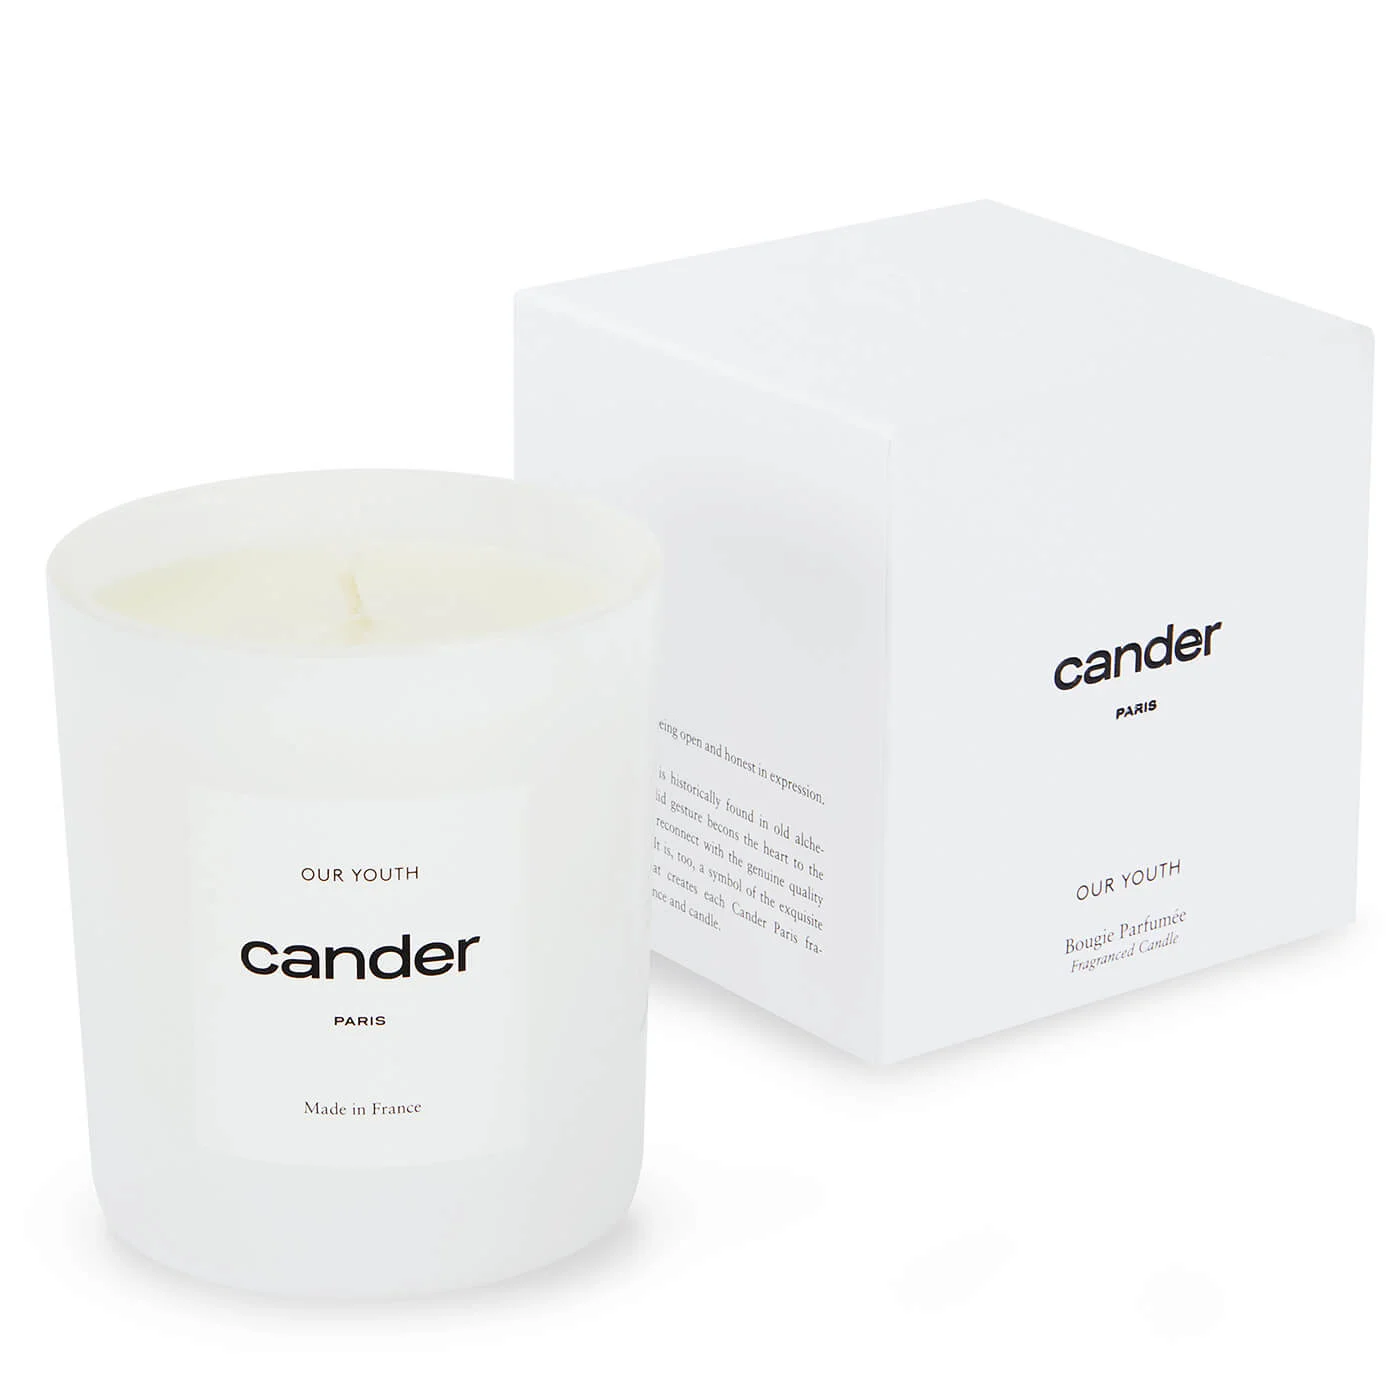 Cander Paris Our Youth Candle - 250g Image 1